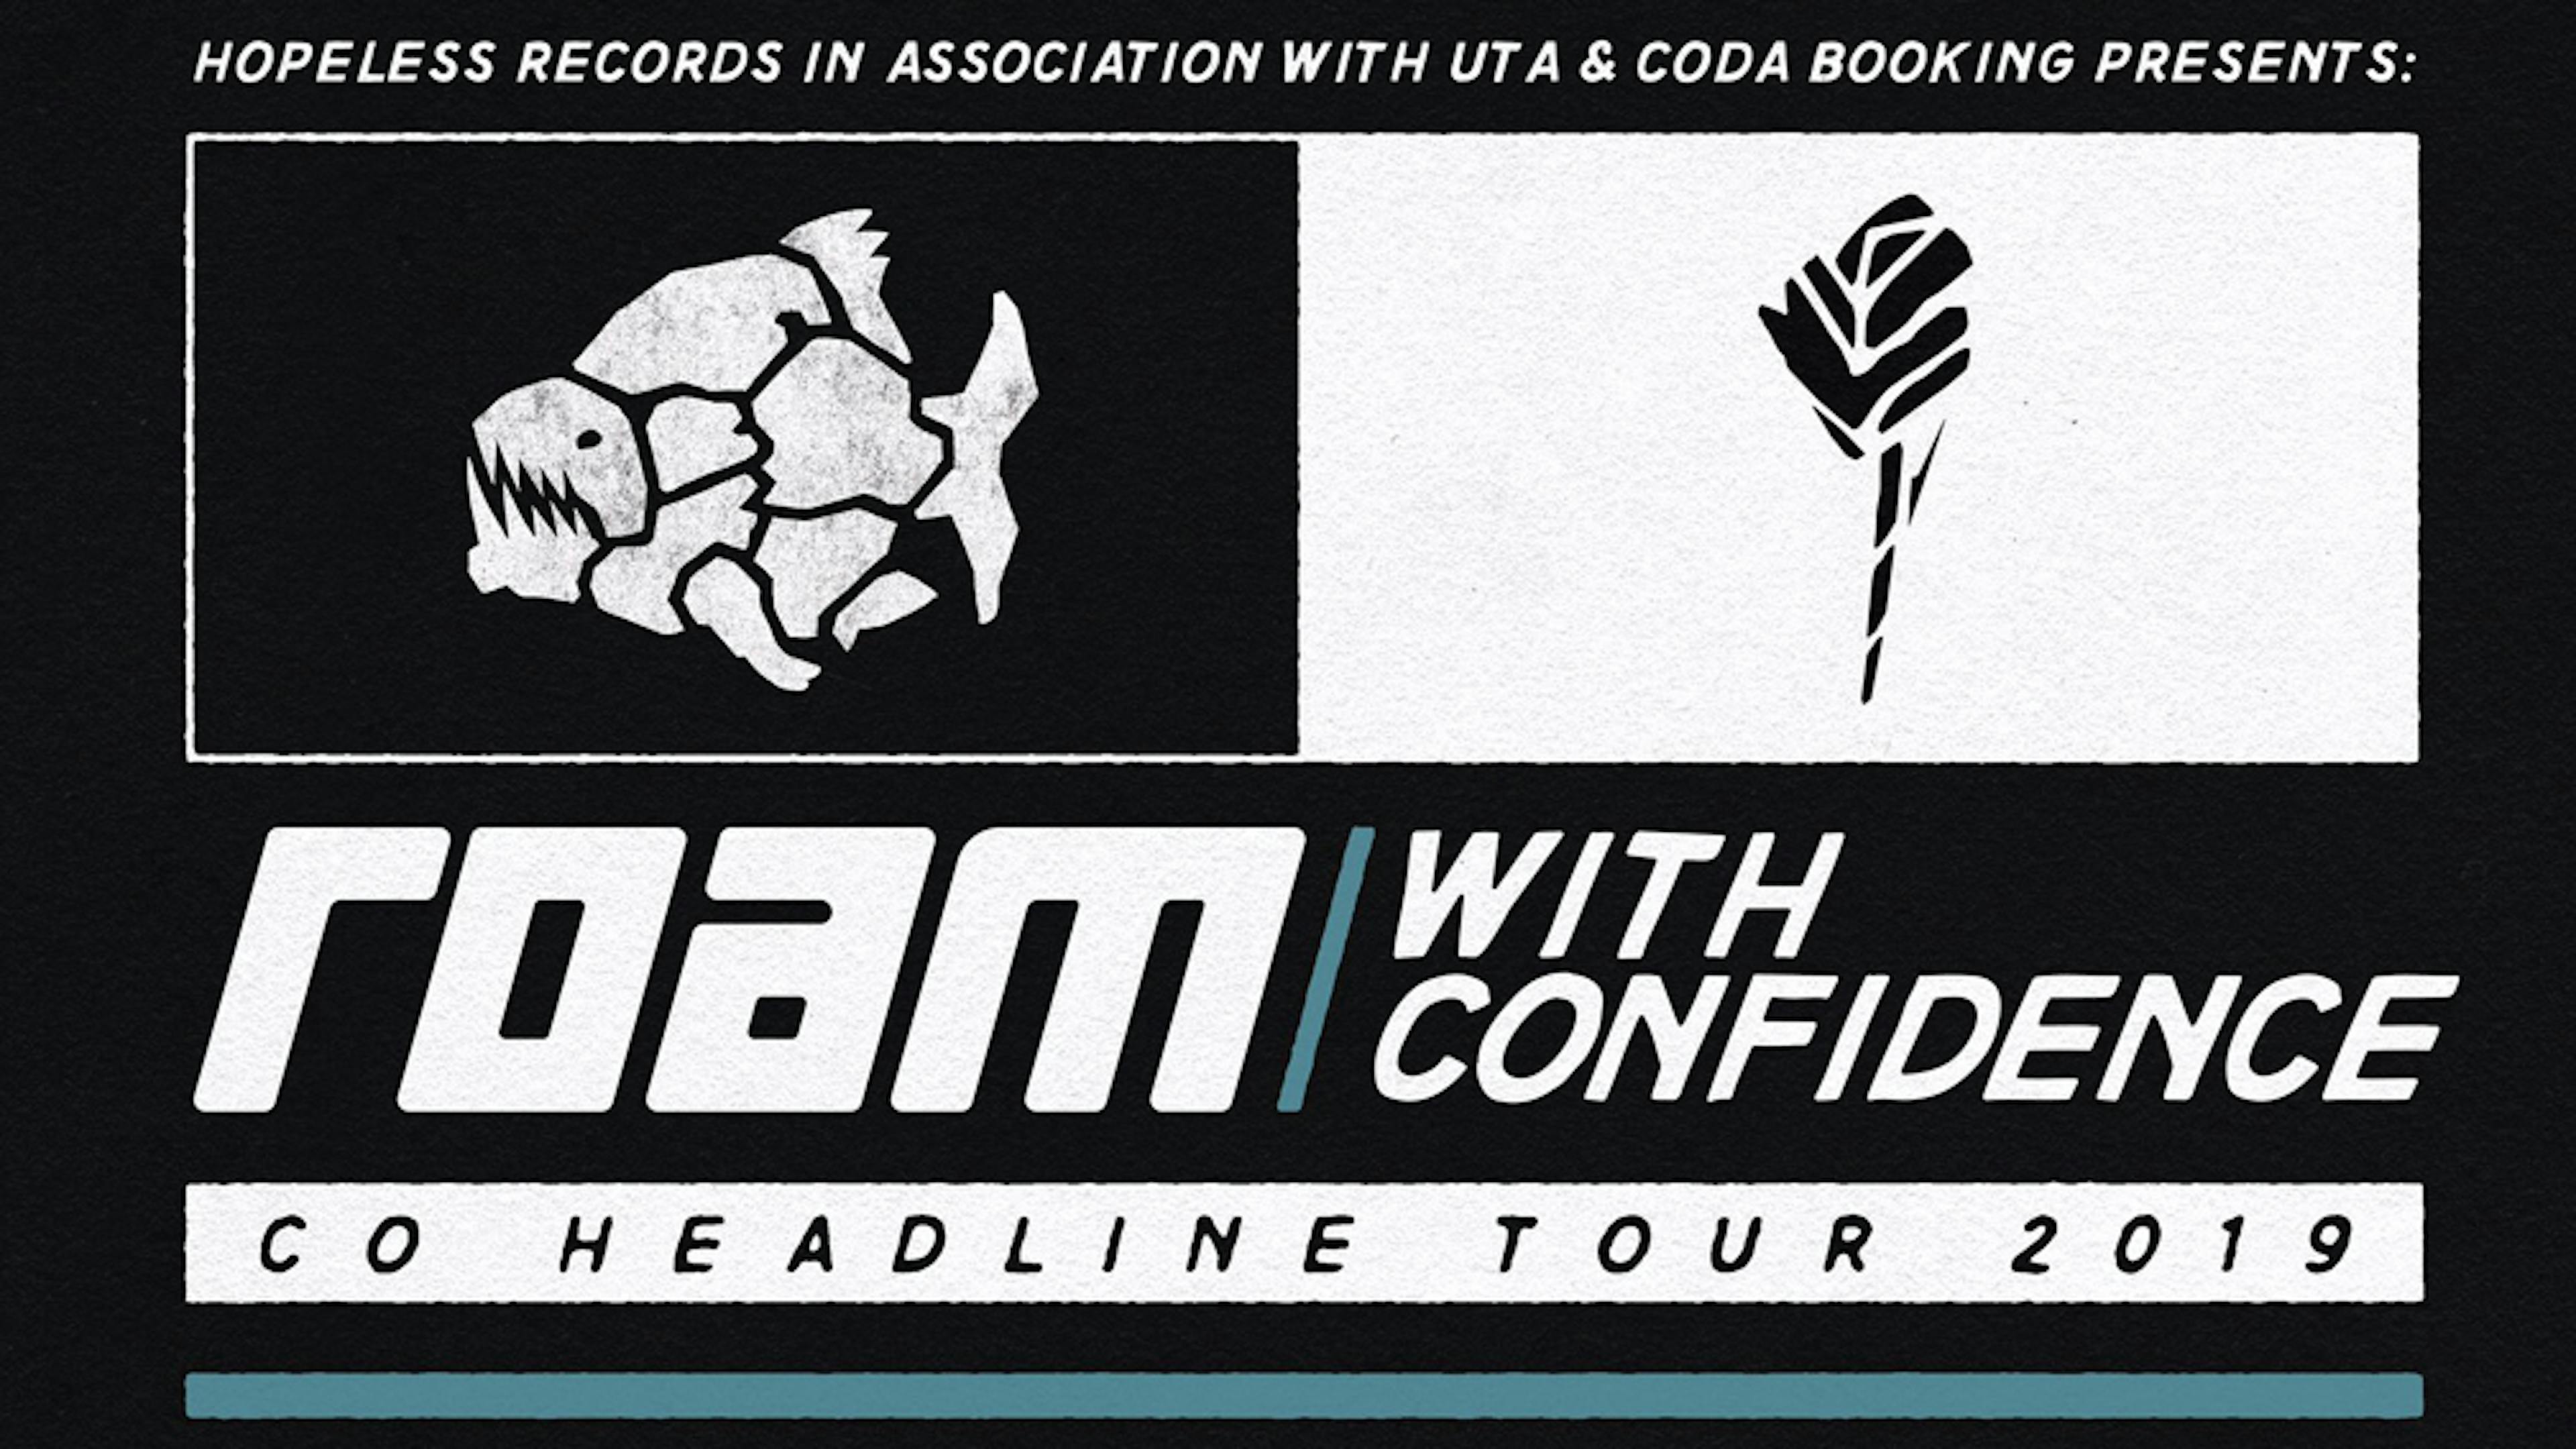 ROAM And With Confidence Have Announced A Co-Headline Tour